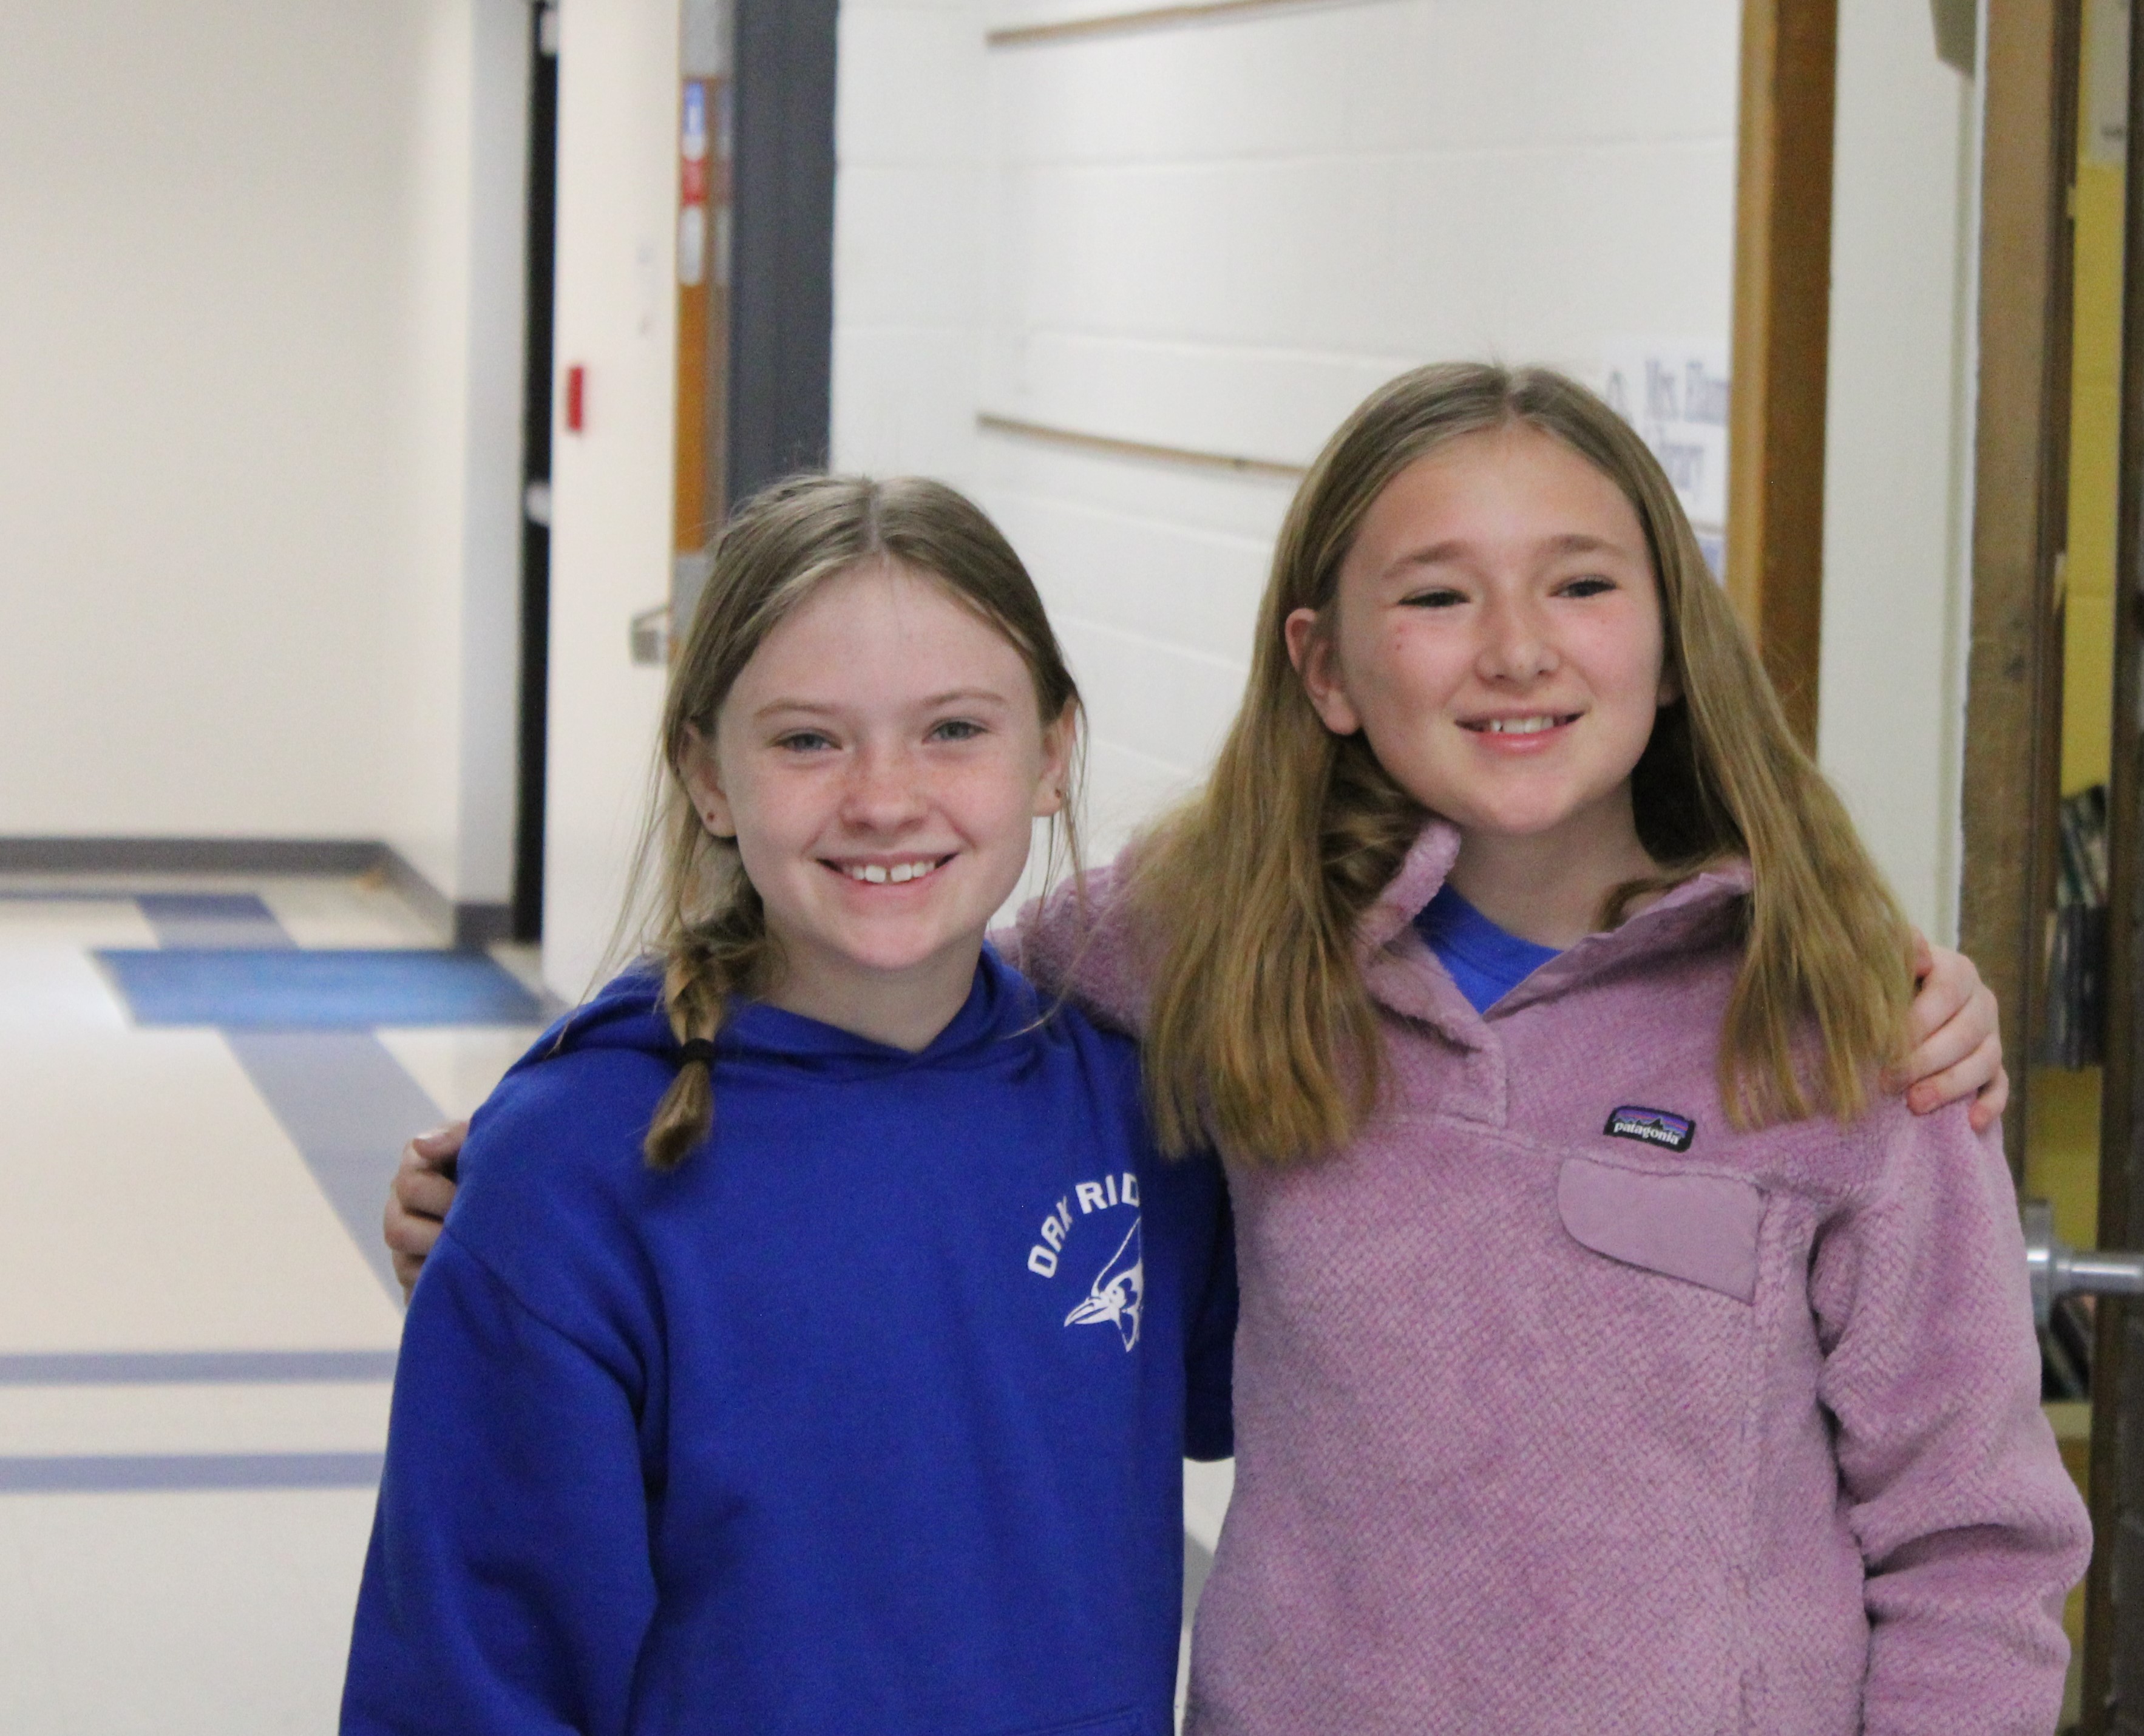 Two elementary girls happy in the hall